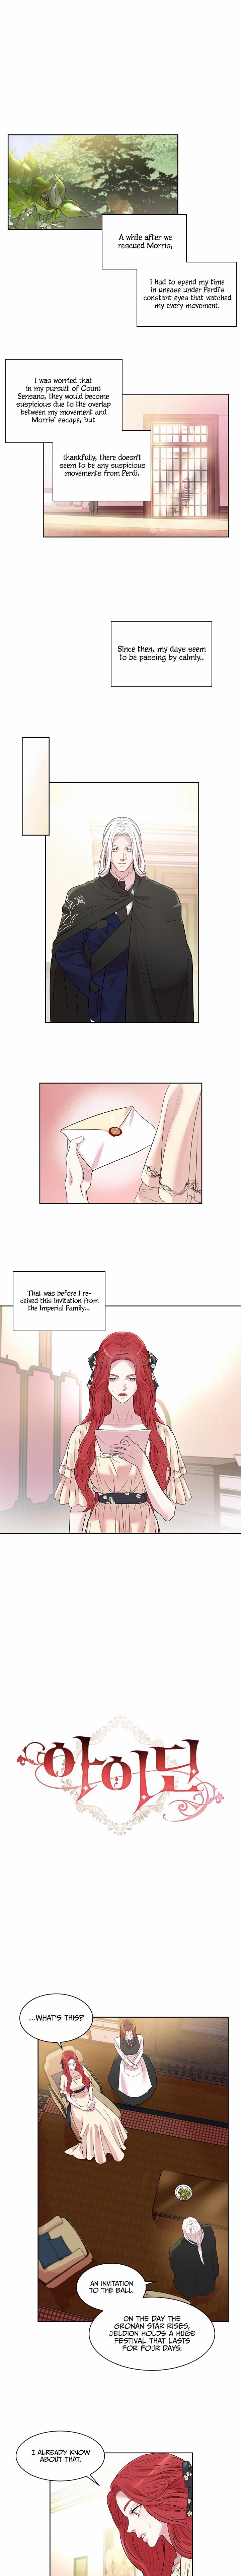 Aideen - Page 1